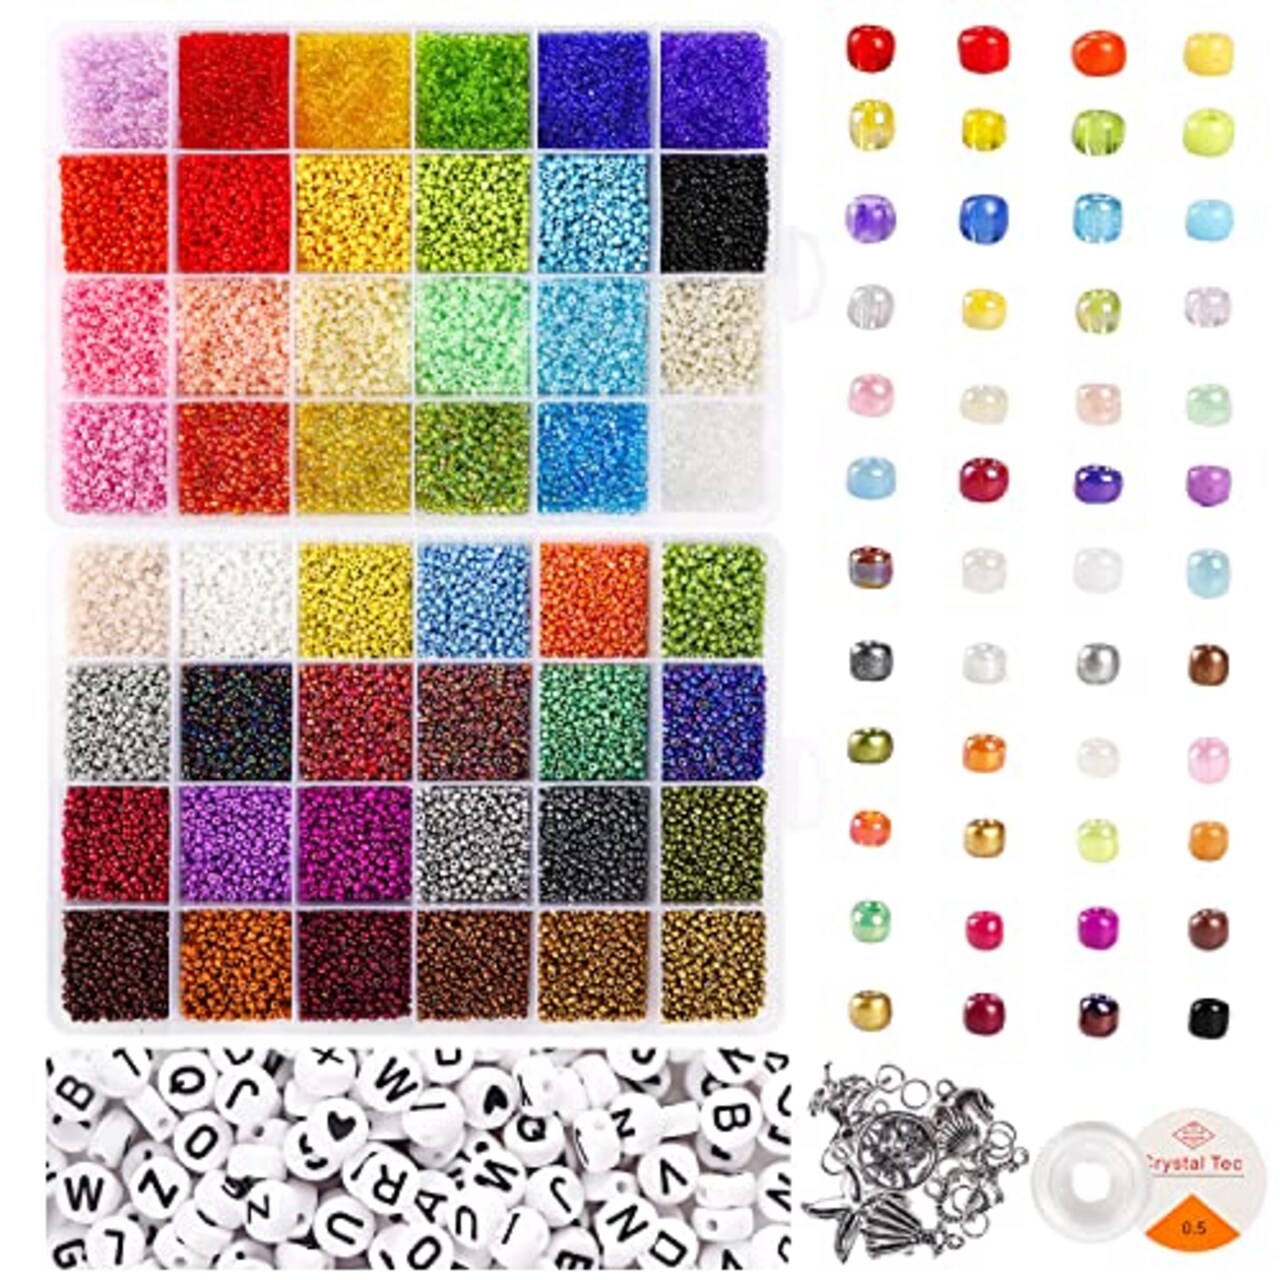 UOONY 35000pcs 2mm Glass Seed Beads for Jewelry Making Kit, 250pcs Alphabet  Letter Beads, Tiny Beads Set for Bracelets Making, DIY, Art and Craft with  Rolls of Elastic String Cord, Charms and